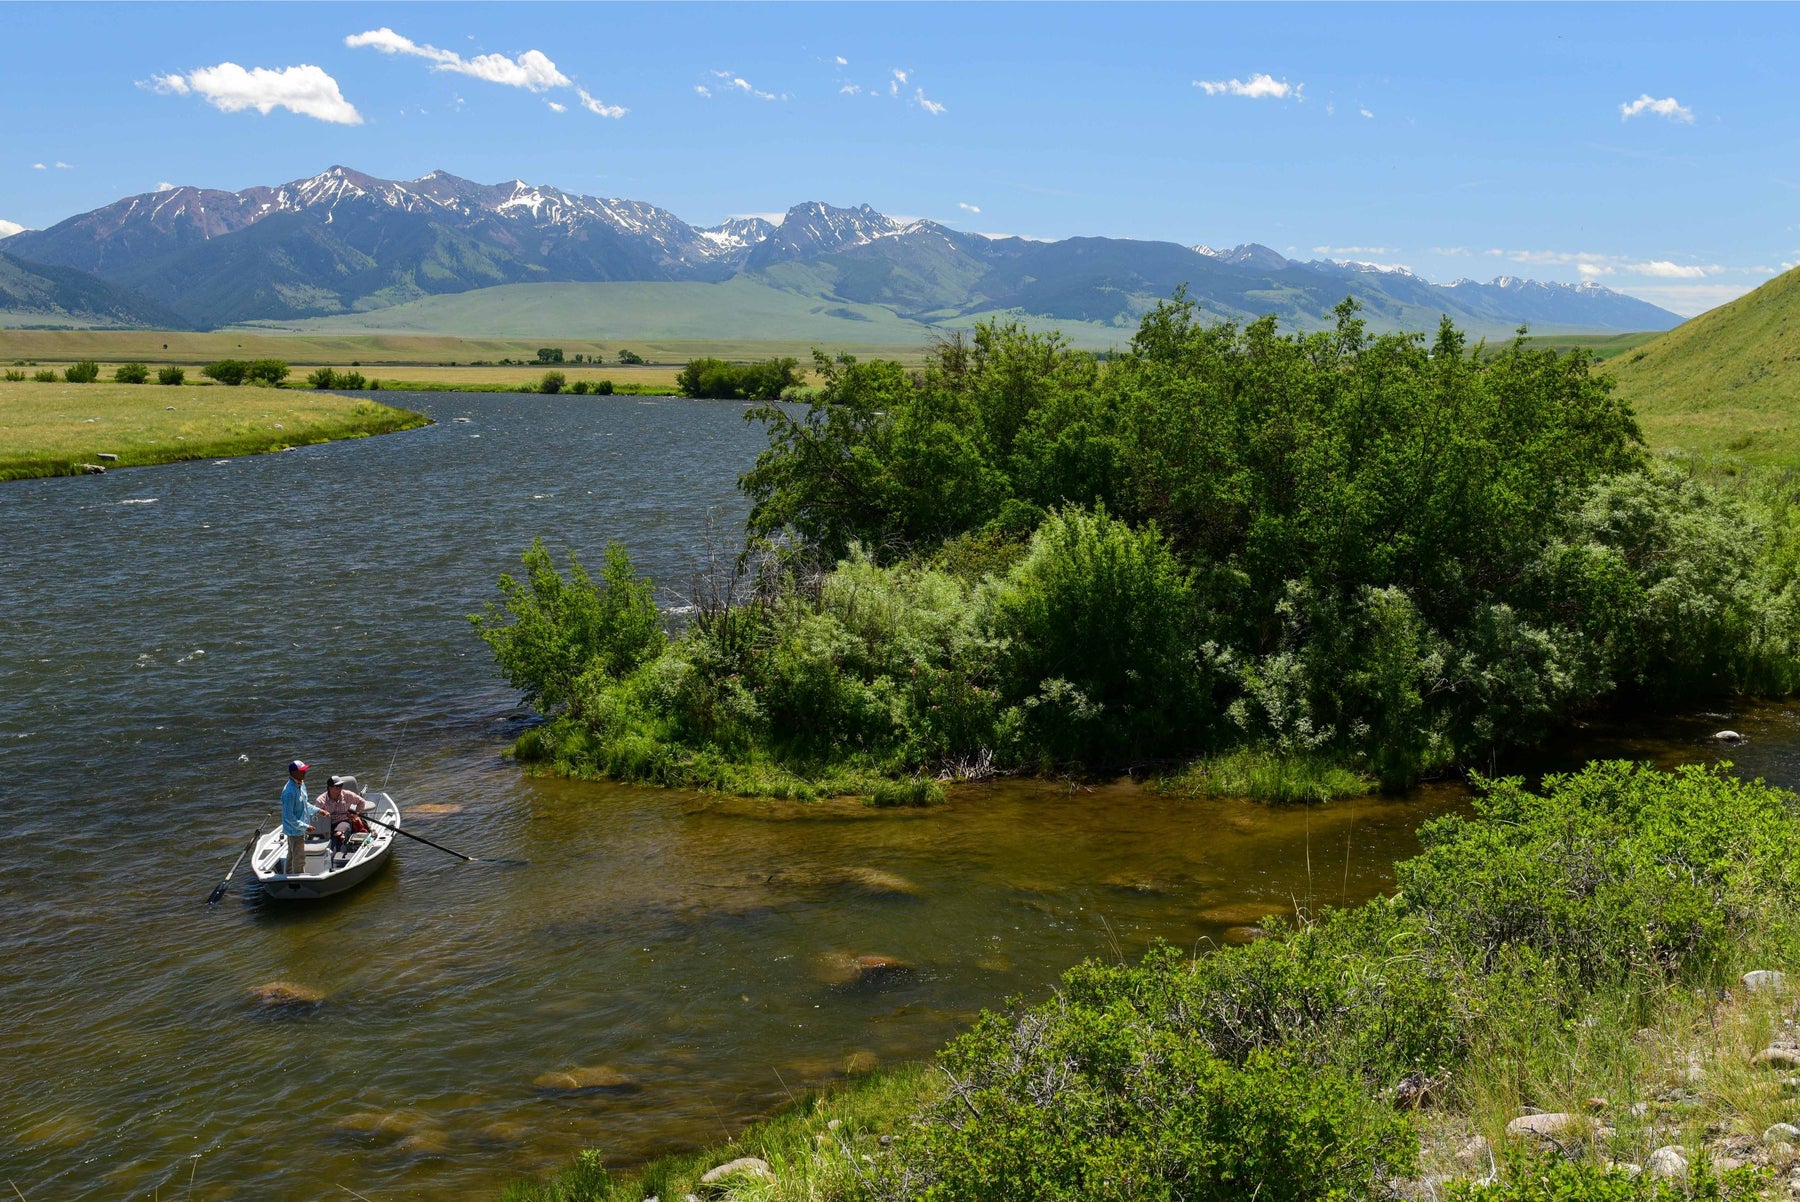 Montana: Fish the Same River Intimately or Multiple Rivers in One Trip